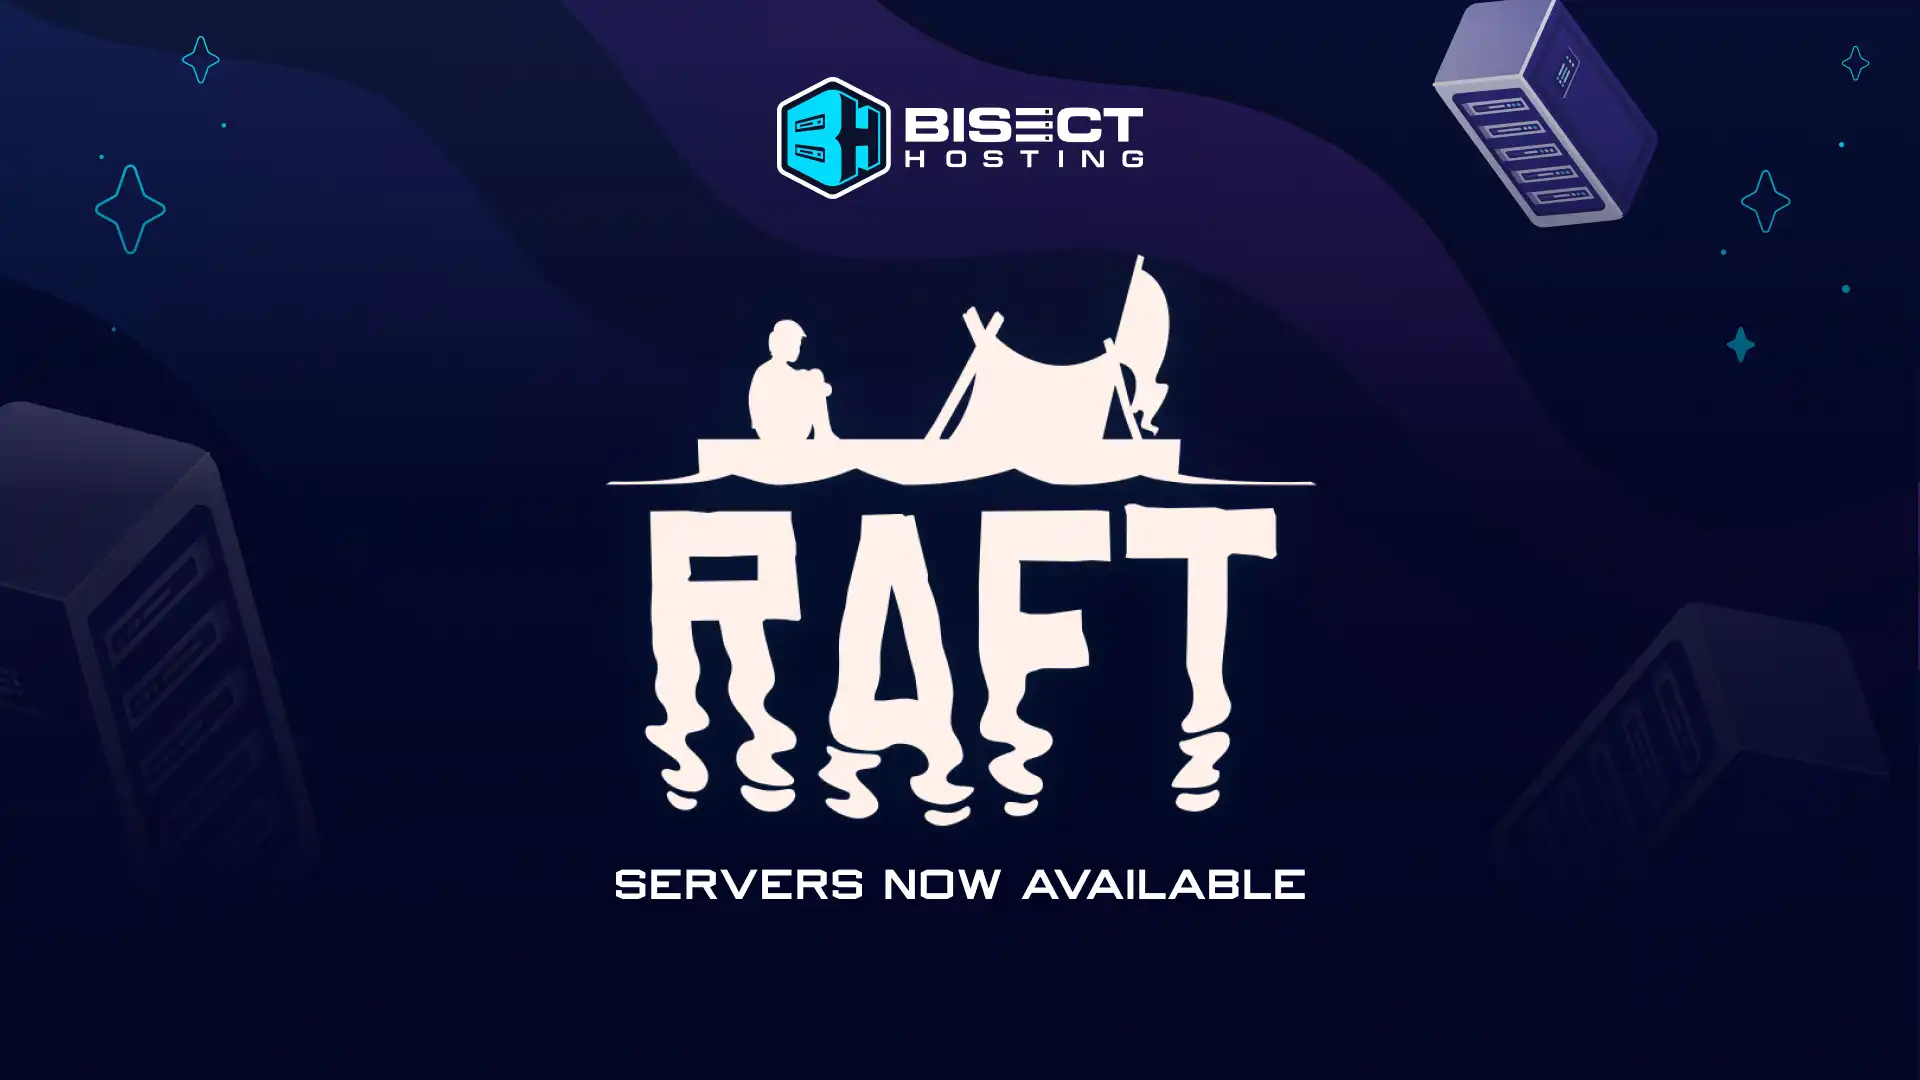 Raft (RDS) Dedicated Server Hosting Available Now With BisectHosting